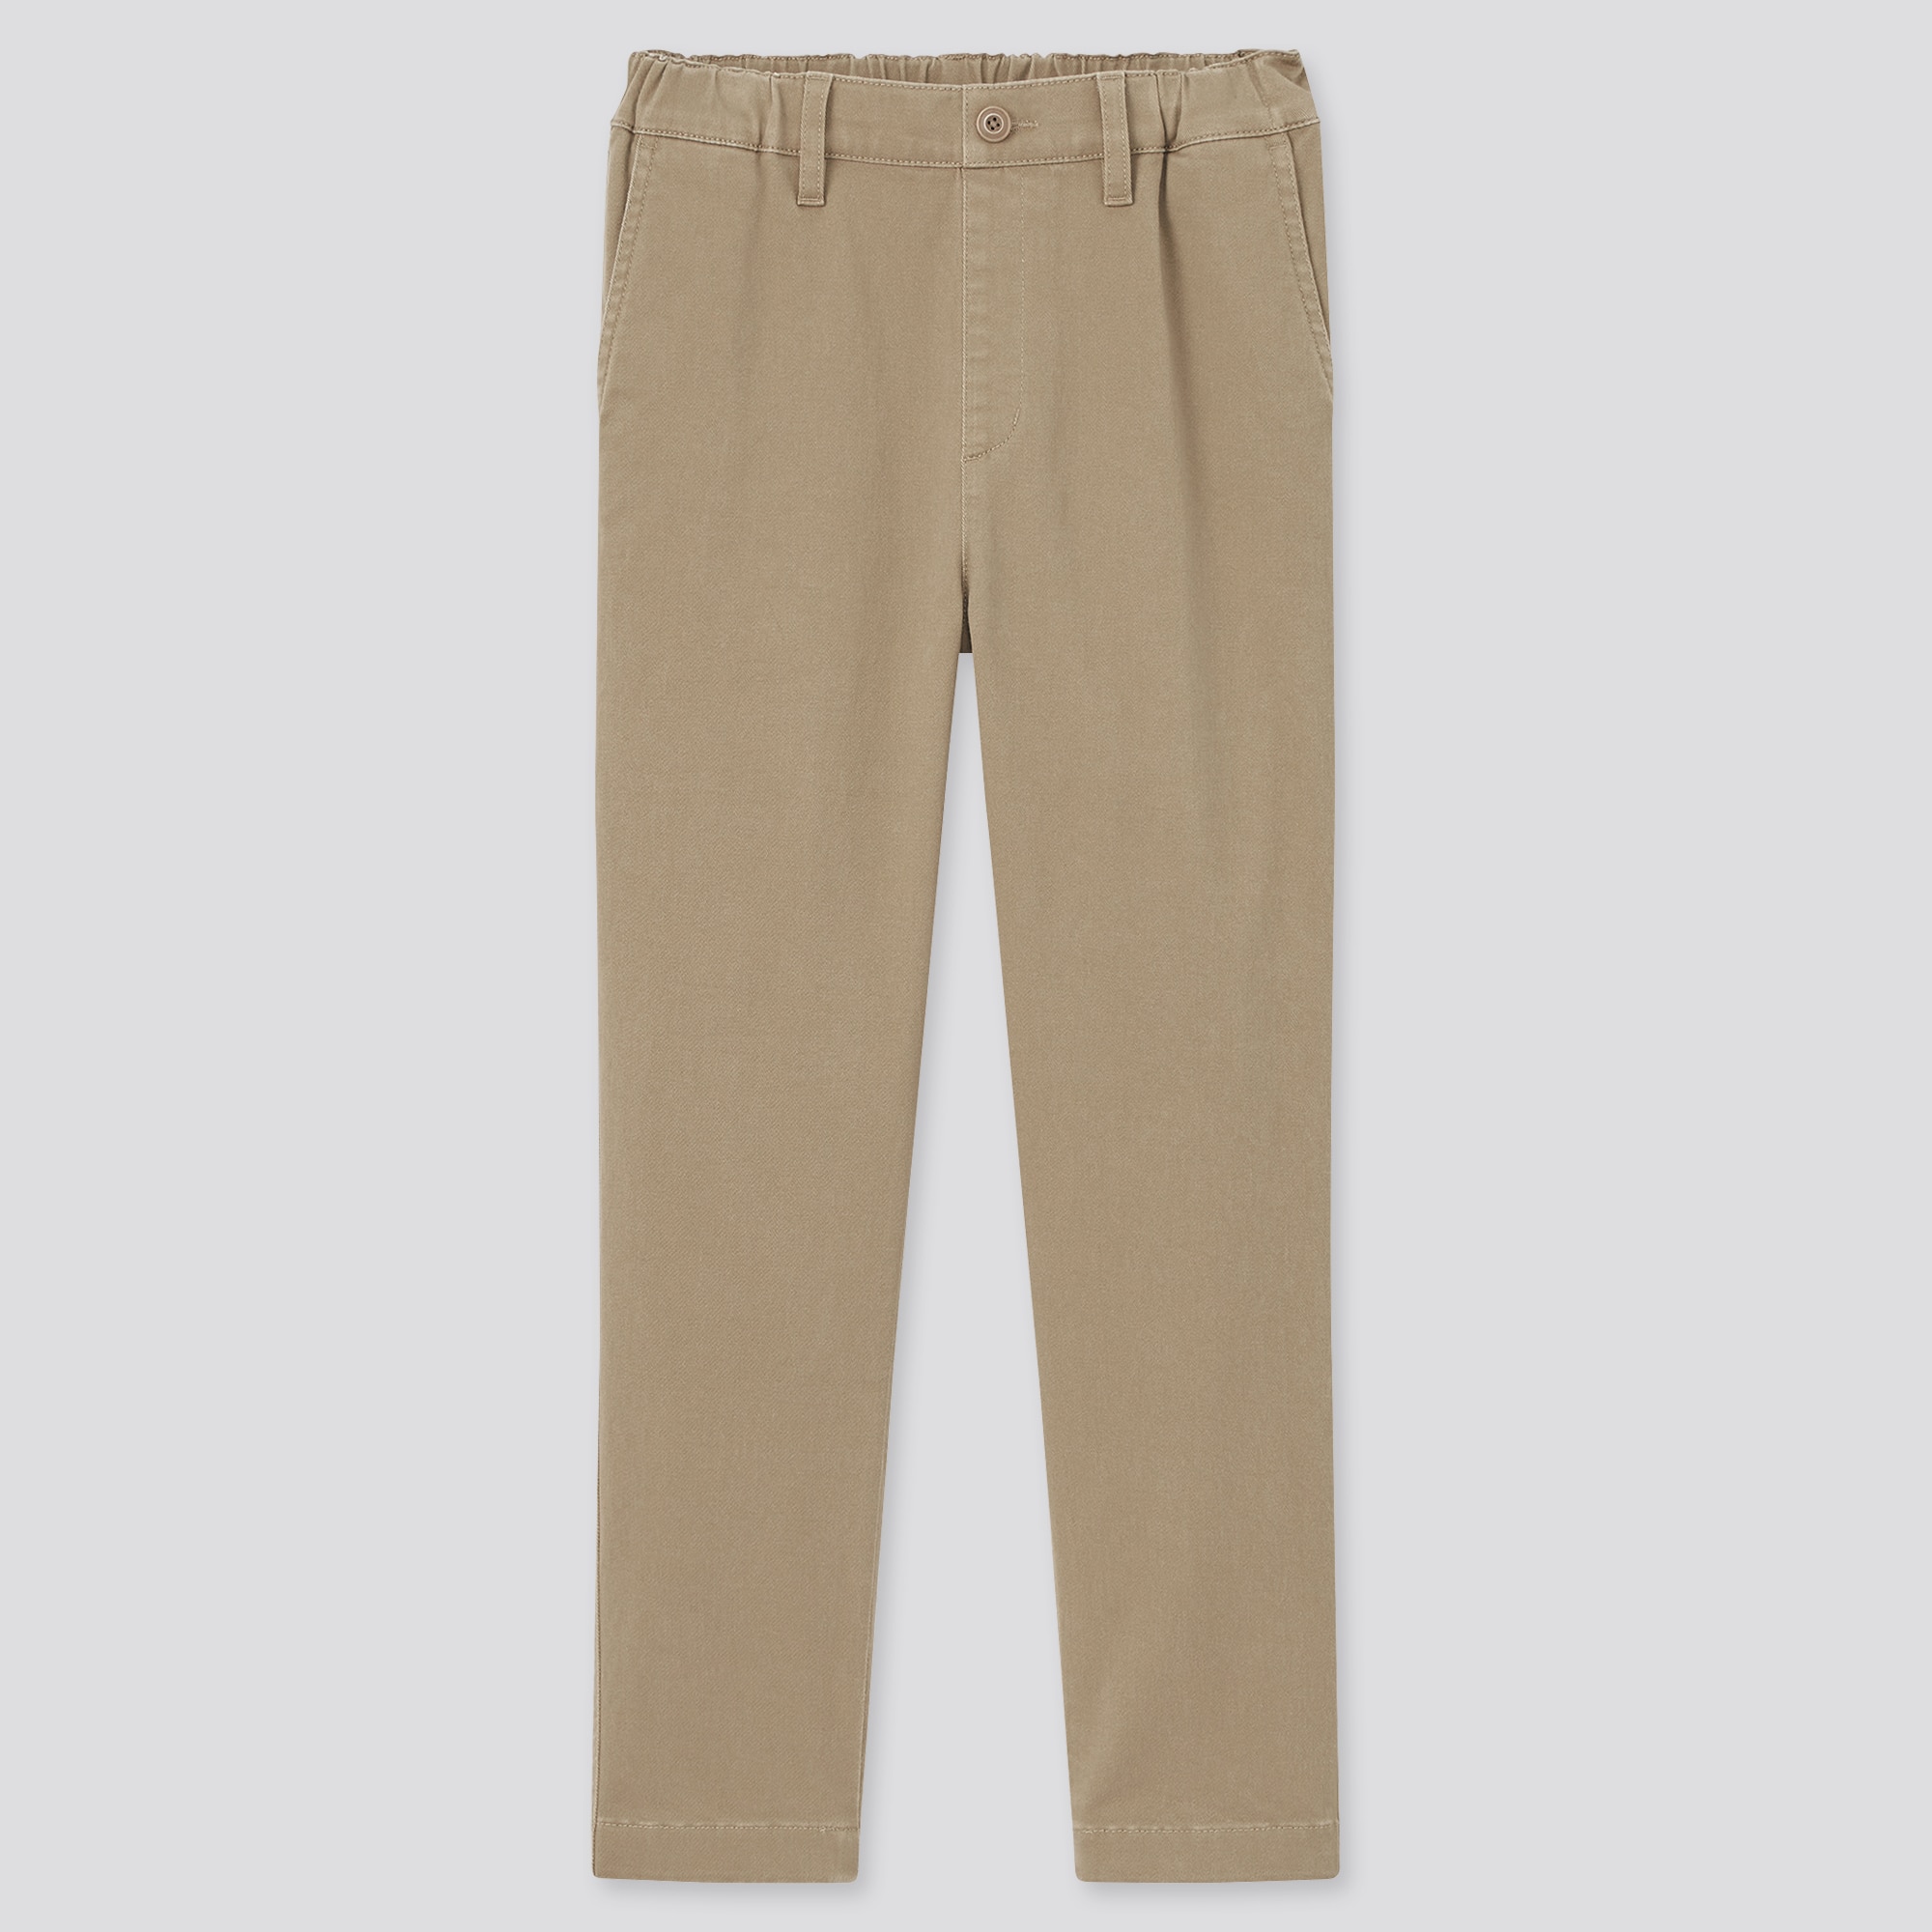 Ultra Stretch Regular-Fit Pull-On Chino Pants | UNIQLO US